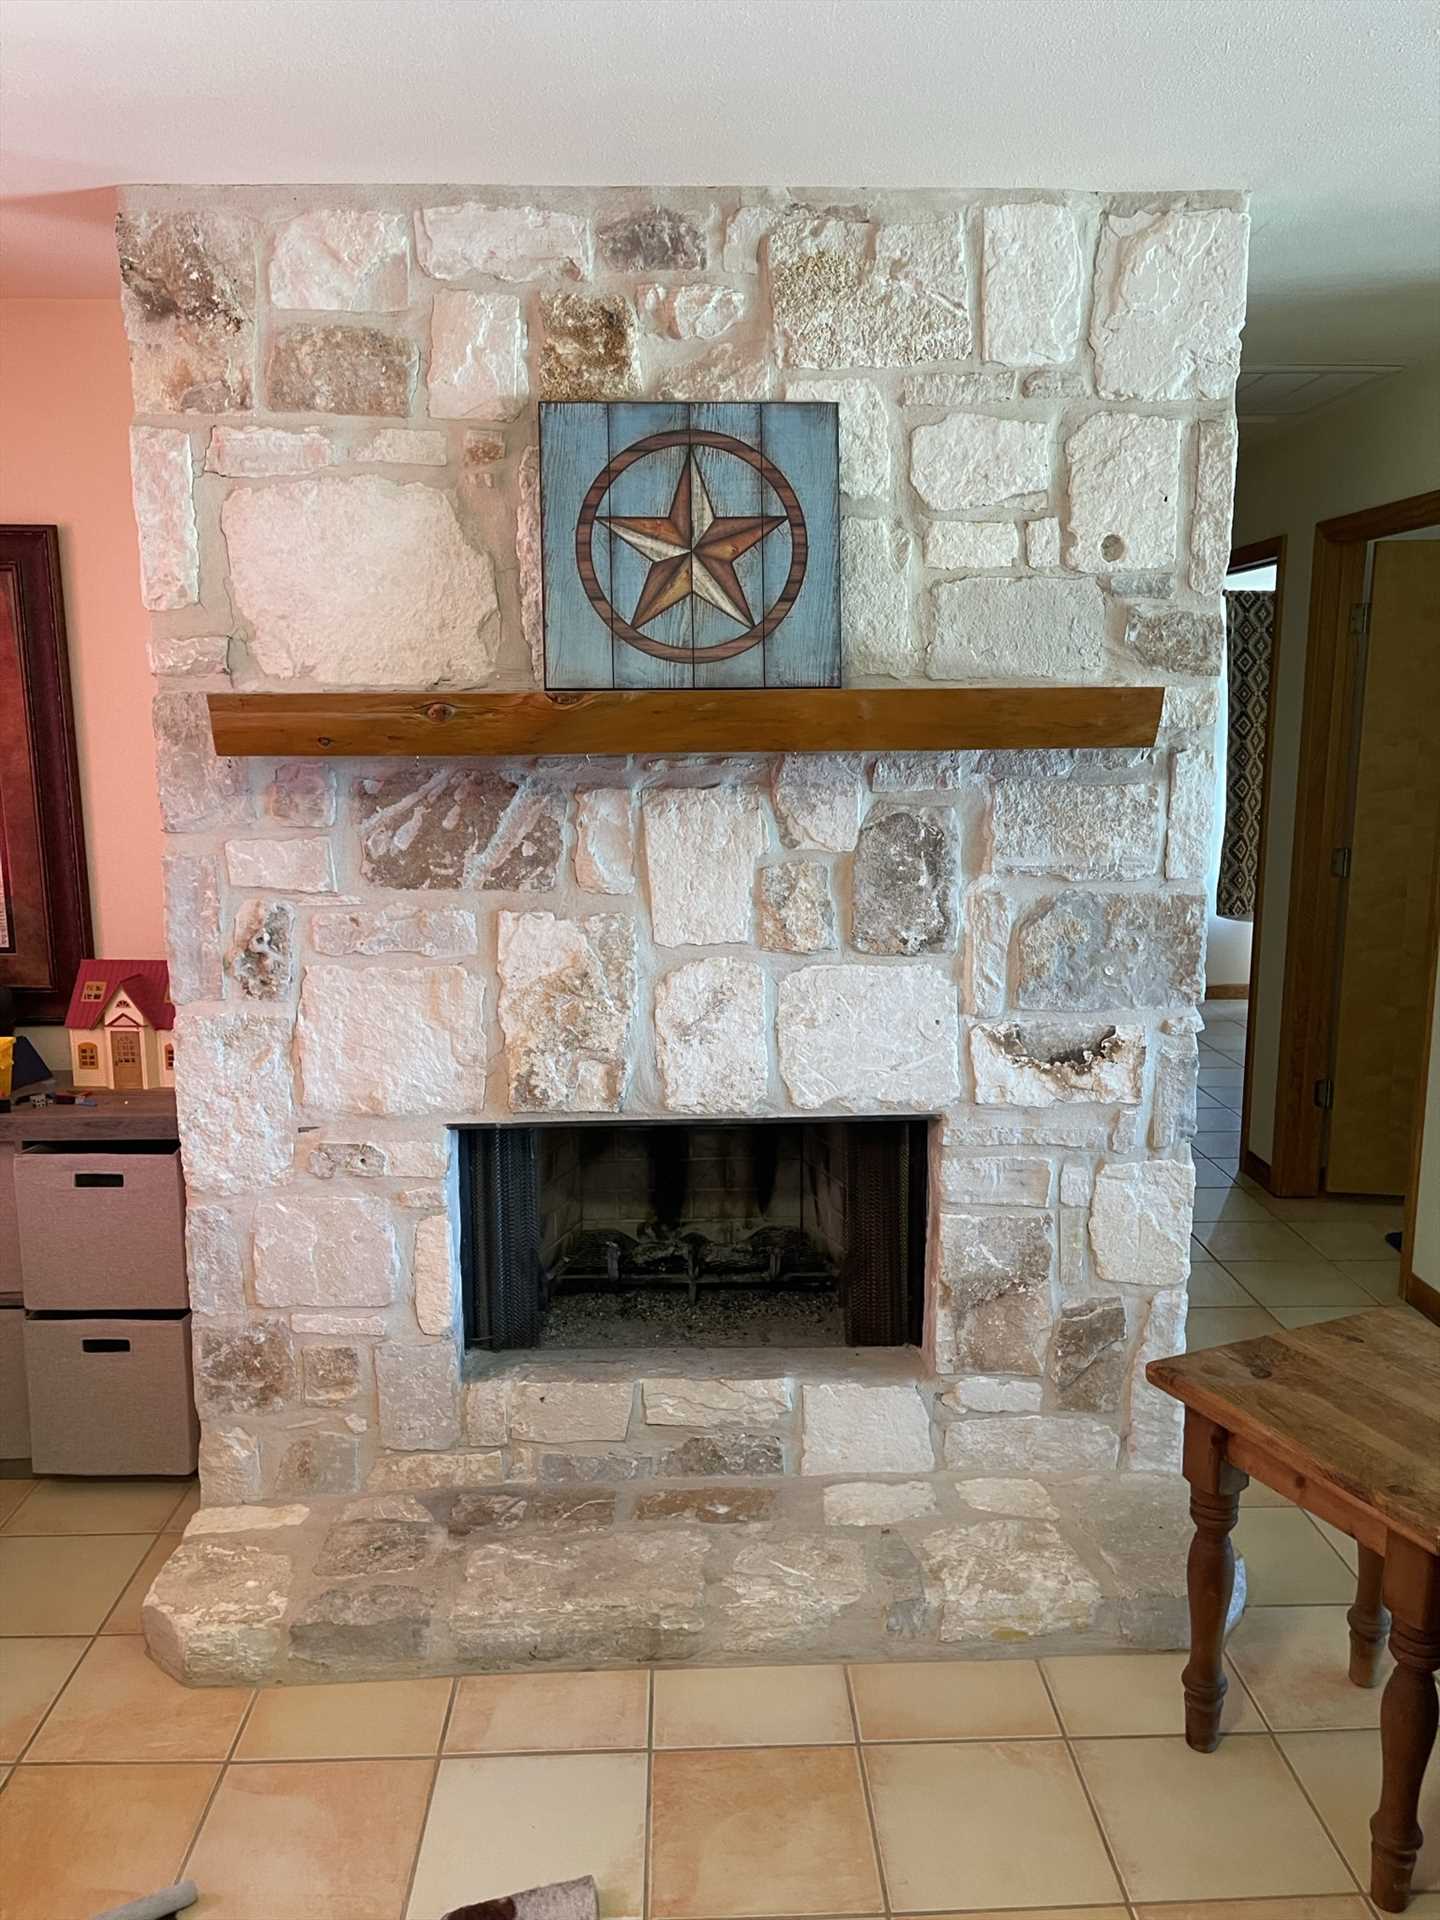                                                 Take the frosty bite out of chilly Texas nights with a crackling fire in the stone fireplace!